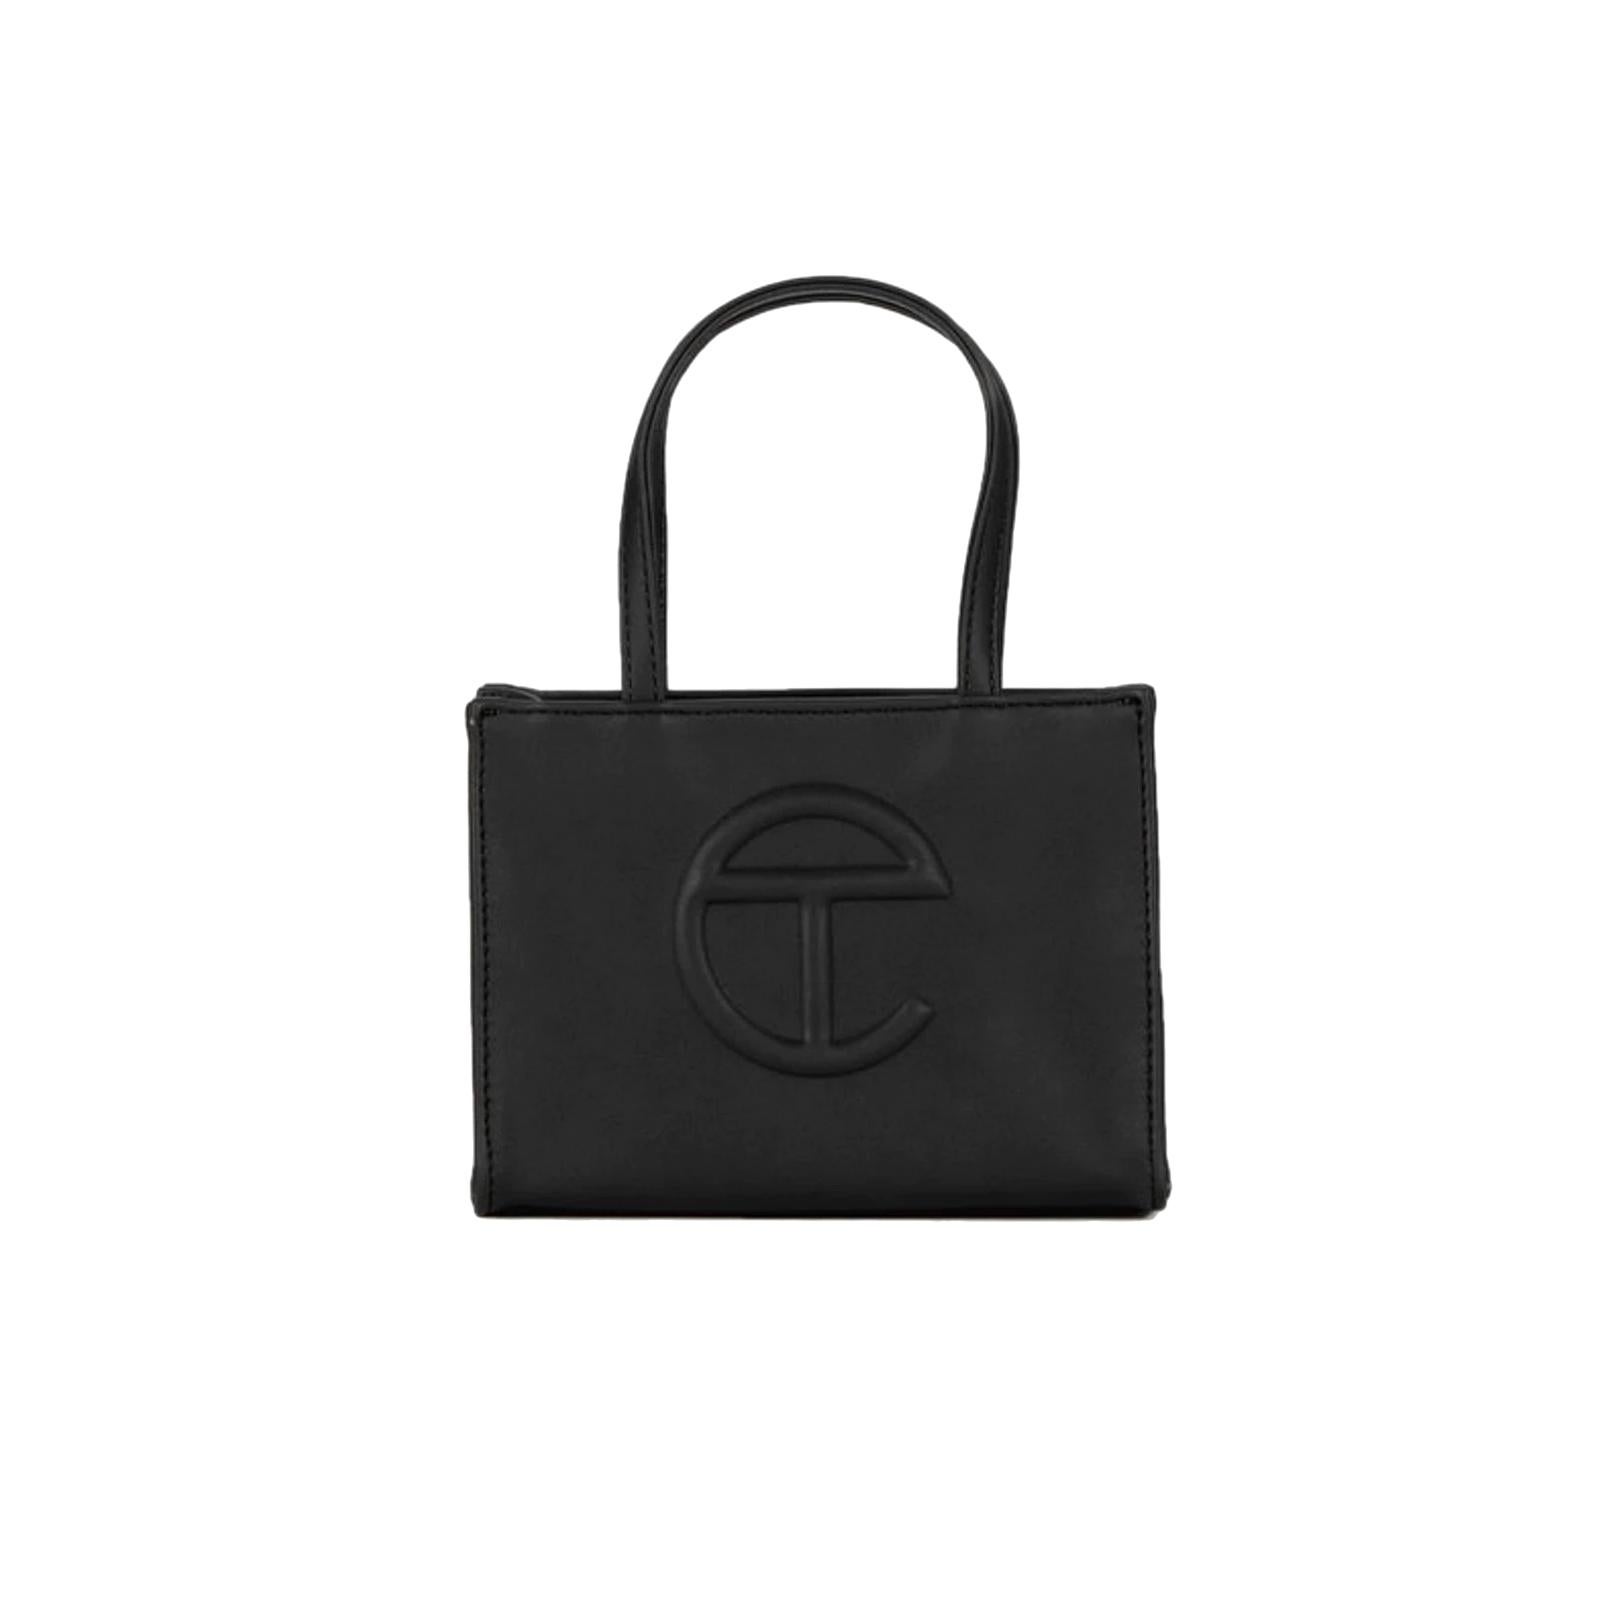 This bag is made with with vegan/faux leather and twill interior lining. Featuring a double strap (handles and cross-body straps), embossed logo, and magnetic snap closure. The bag is packaged in a 100% cotton drawstring dust bag with screenprinted